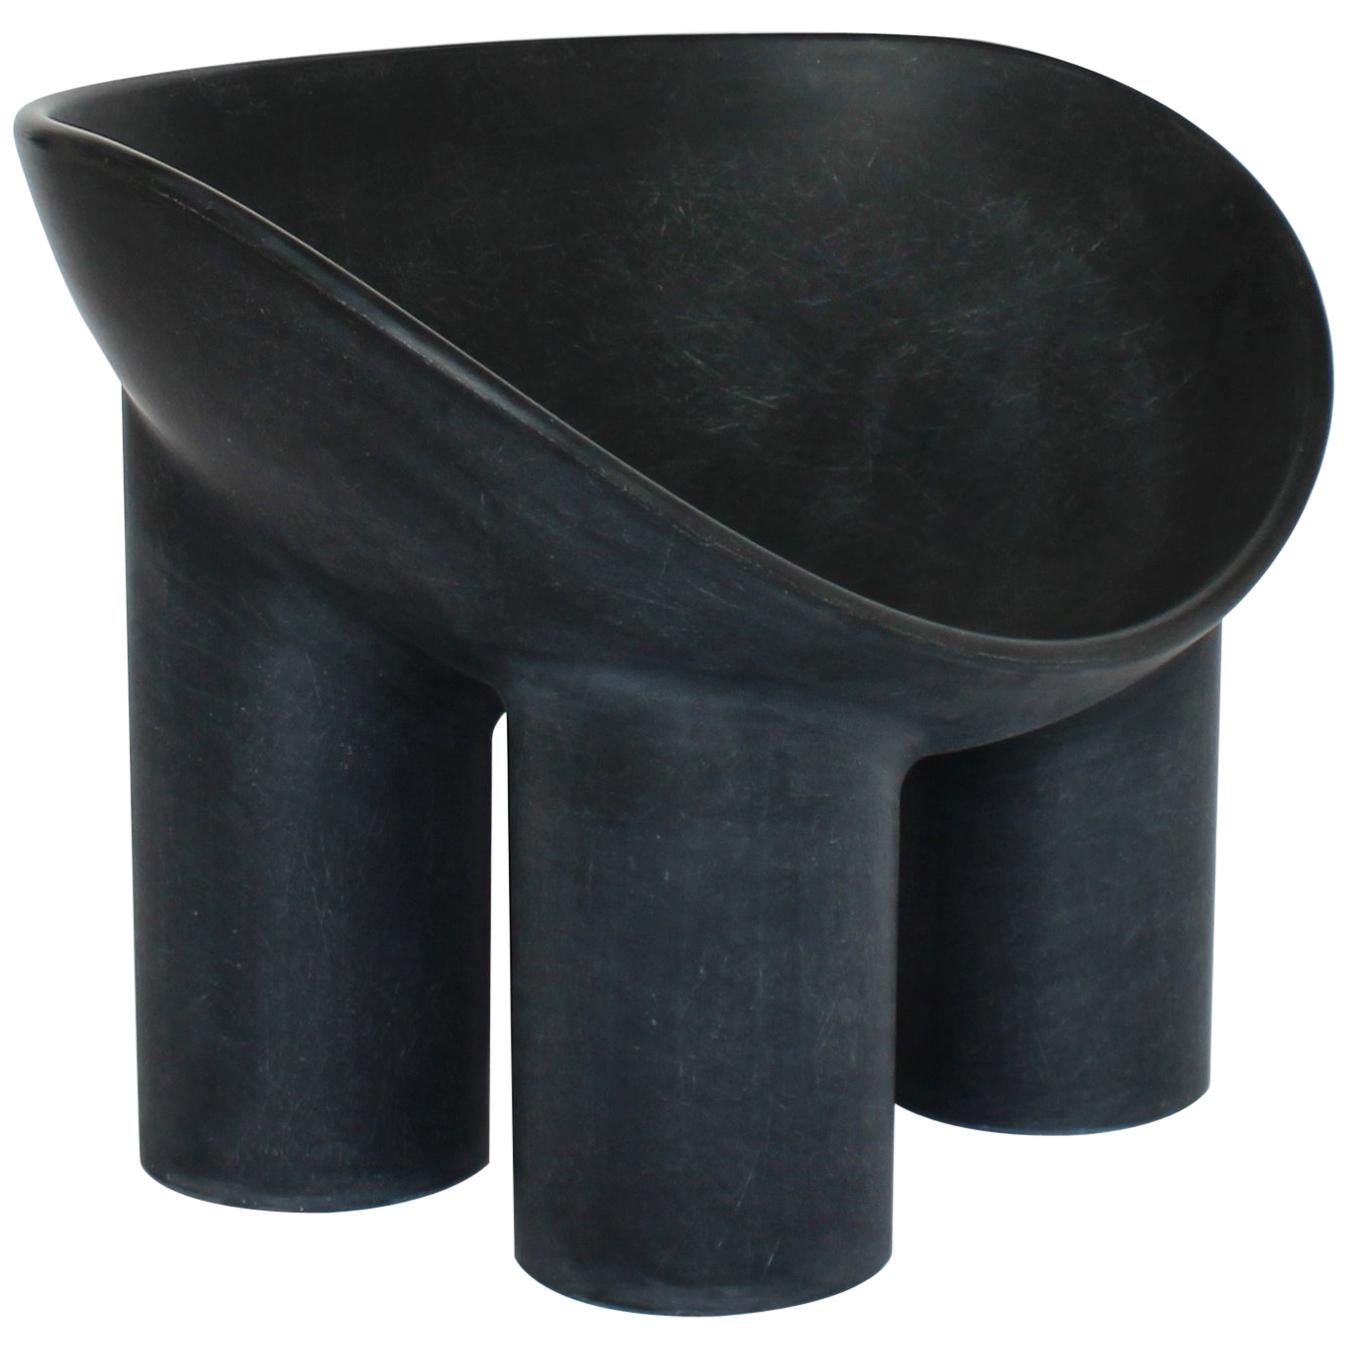 Faye Toogood Contemporary Design Roly-Poly Chair in Charcoal Fibreglass, London